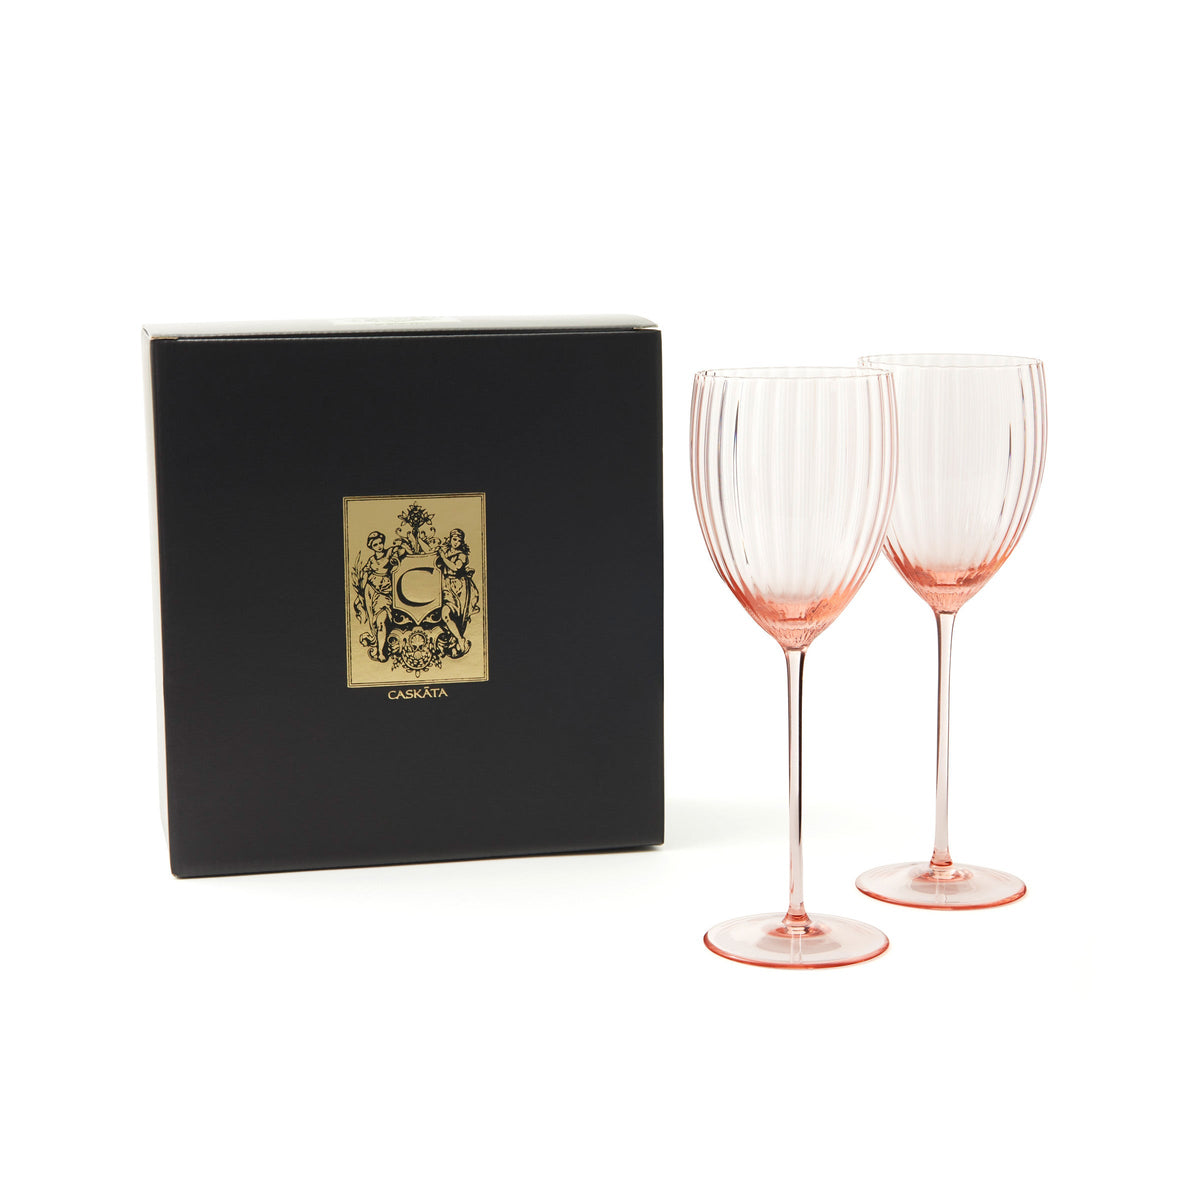 Quinn rose pink mouth-blown crystal universal wine glasses from Caskata.